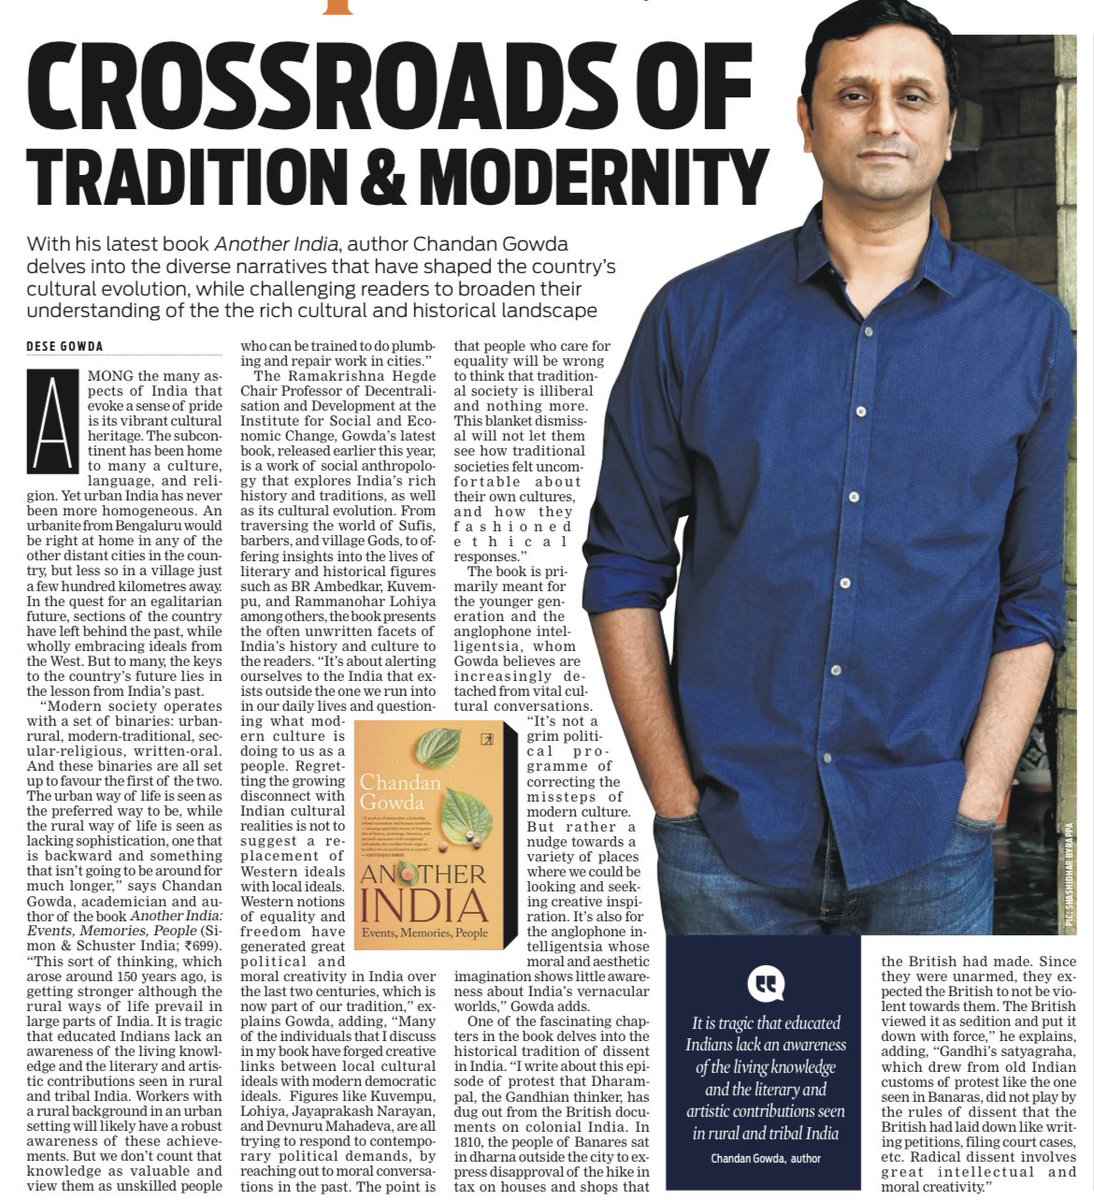 With his latest book Another India, author Chandan Gowda delves into the diverse narratives that have shaped the country’s cultural evolution, while challenging readers to broaden their understanding of the the rich cultural and historical landscape ✍🏼@dese_gowda